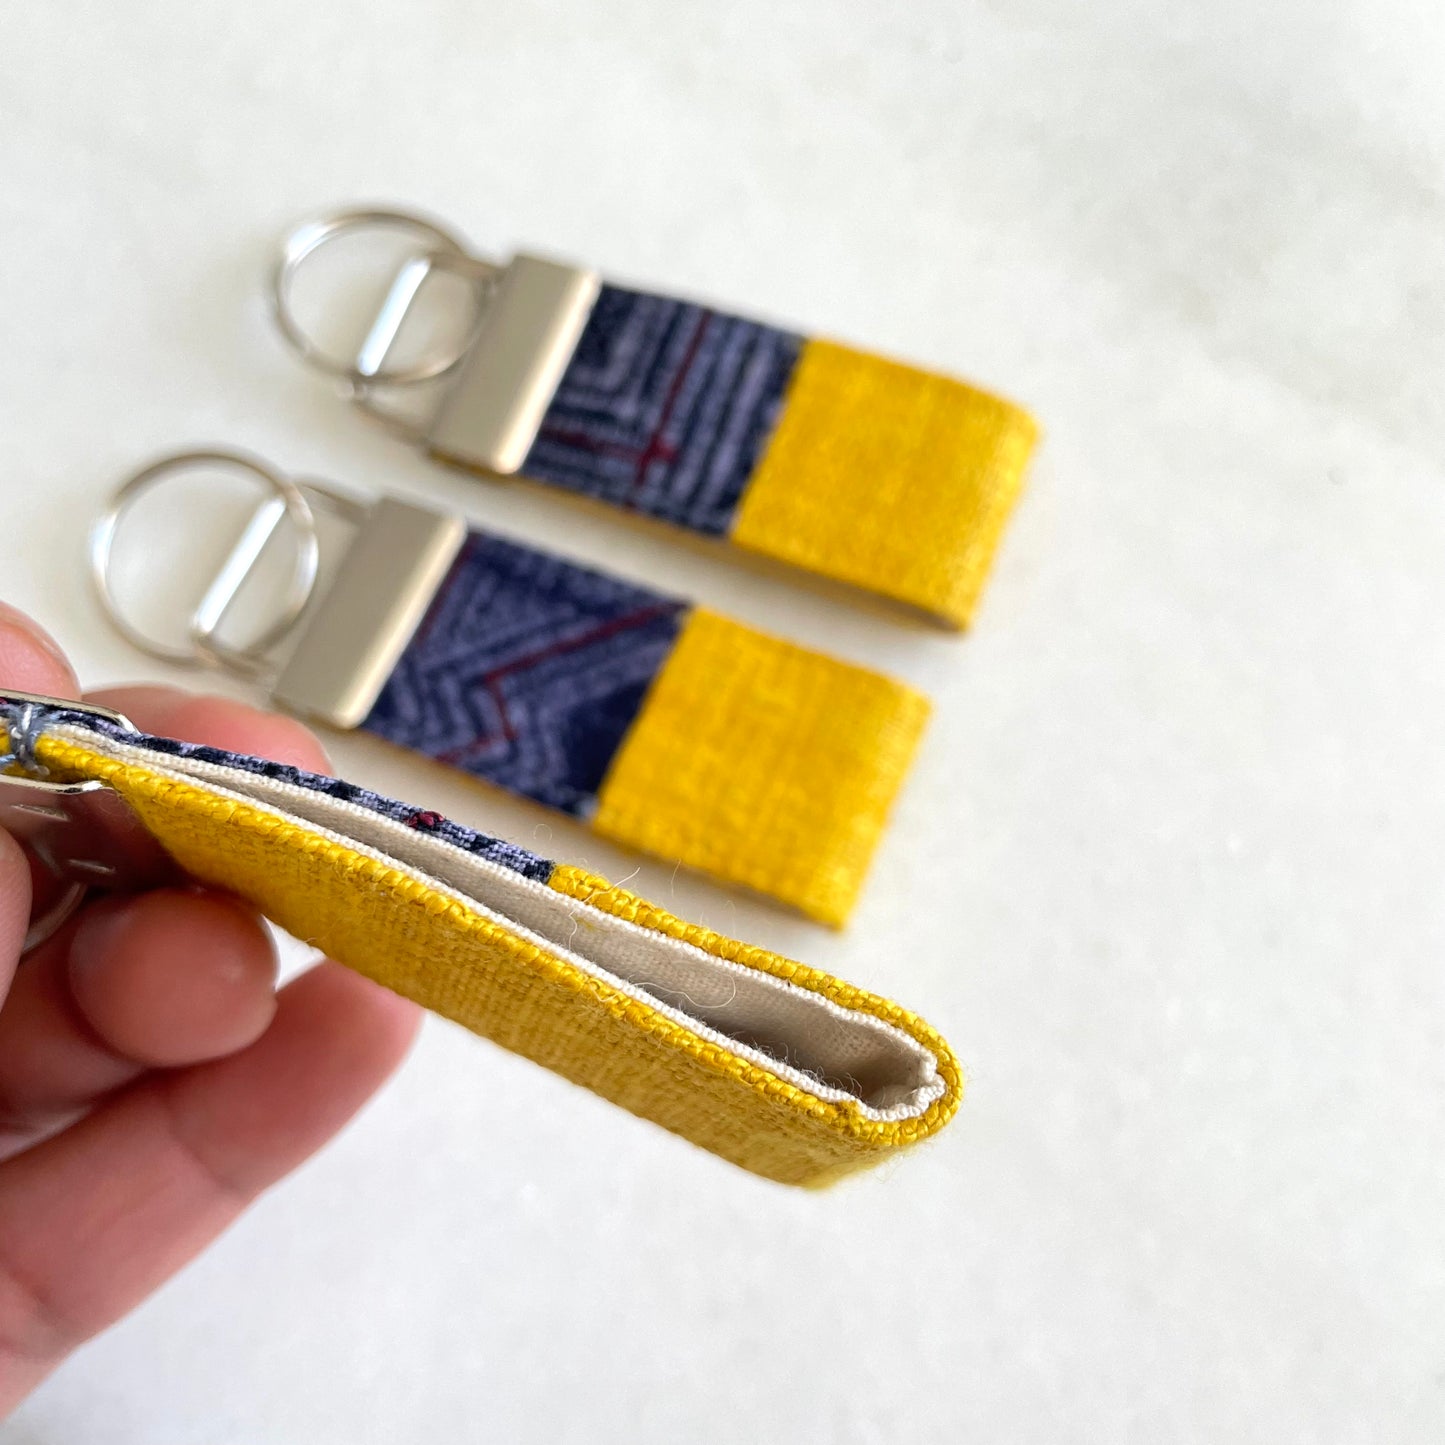 Yellow hemp fabric keychain with vintage batik patch, stainless metal key fob